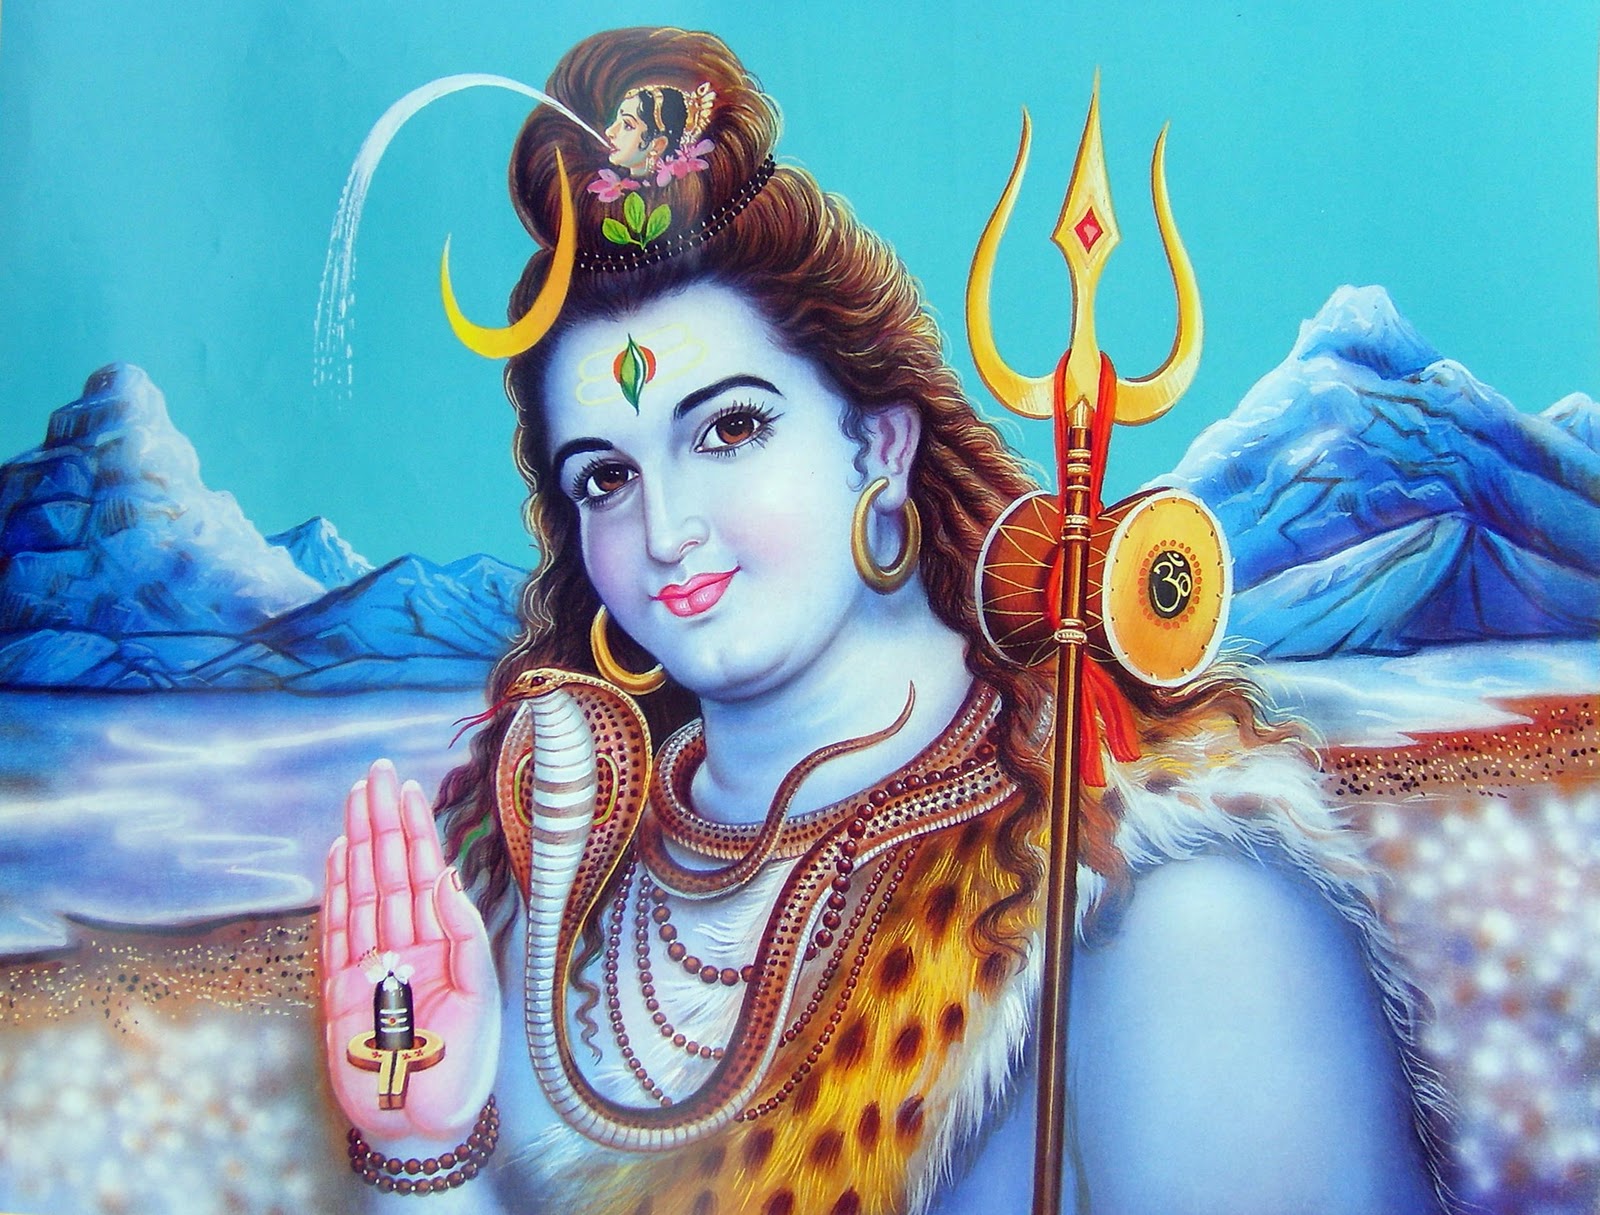 High Definition Photo And Wallpapers: lord siva photos, shiva lord